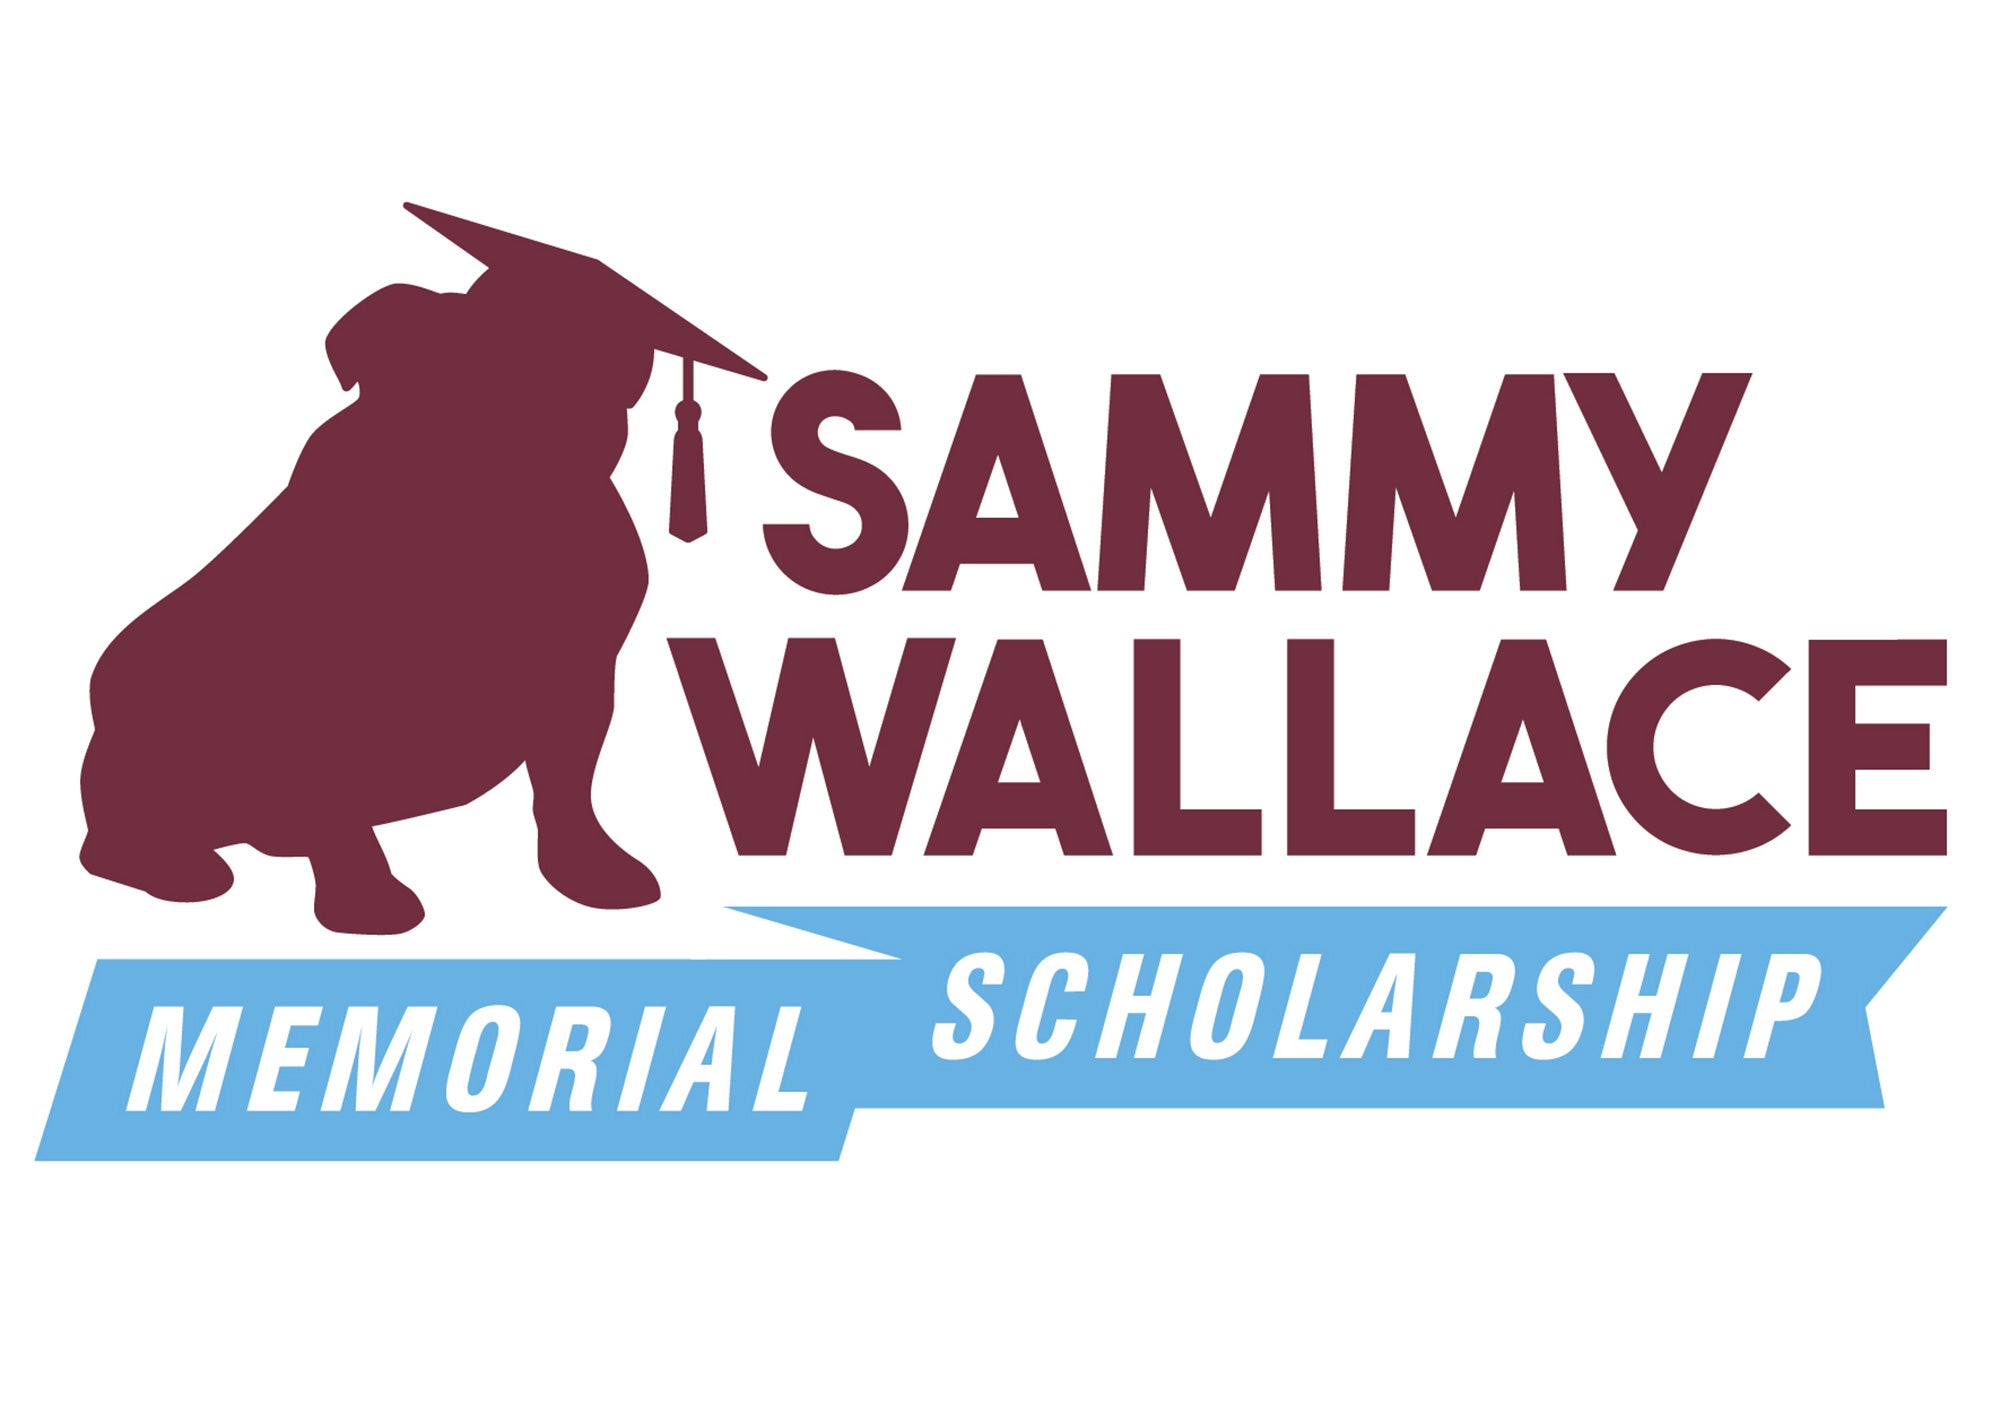 SAMMY WALLACE MEMORIAL SCHOLARSHIP ESTABLISHED TO SUPPORT STUDENTS ENTERING SPORTS AND ENTERTAINMENT INDUSTRY